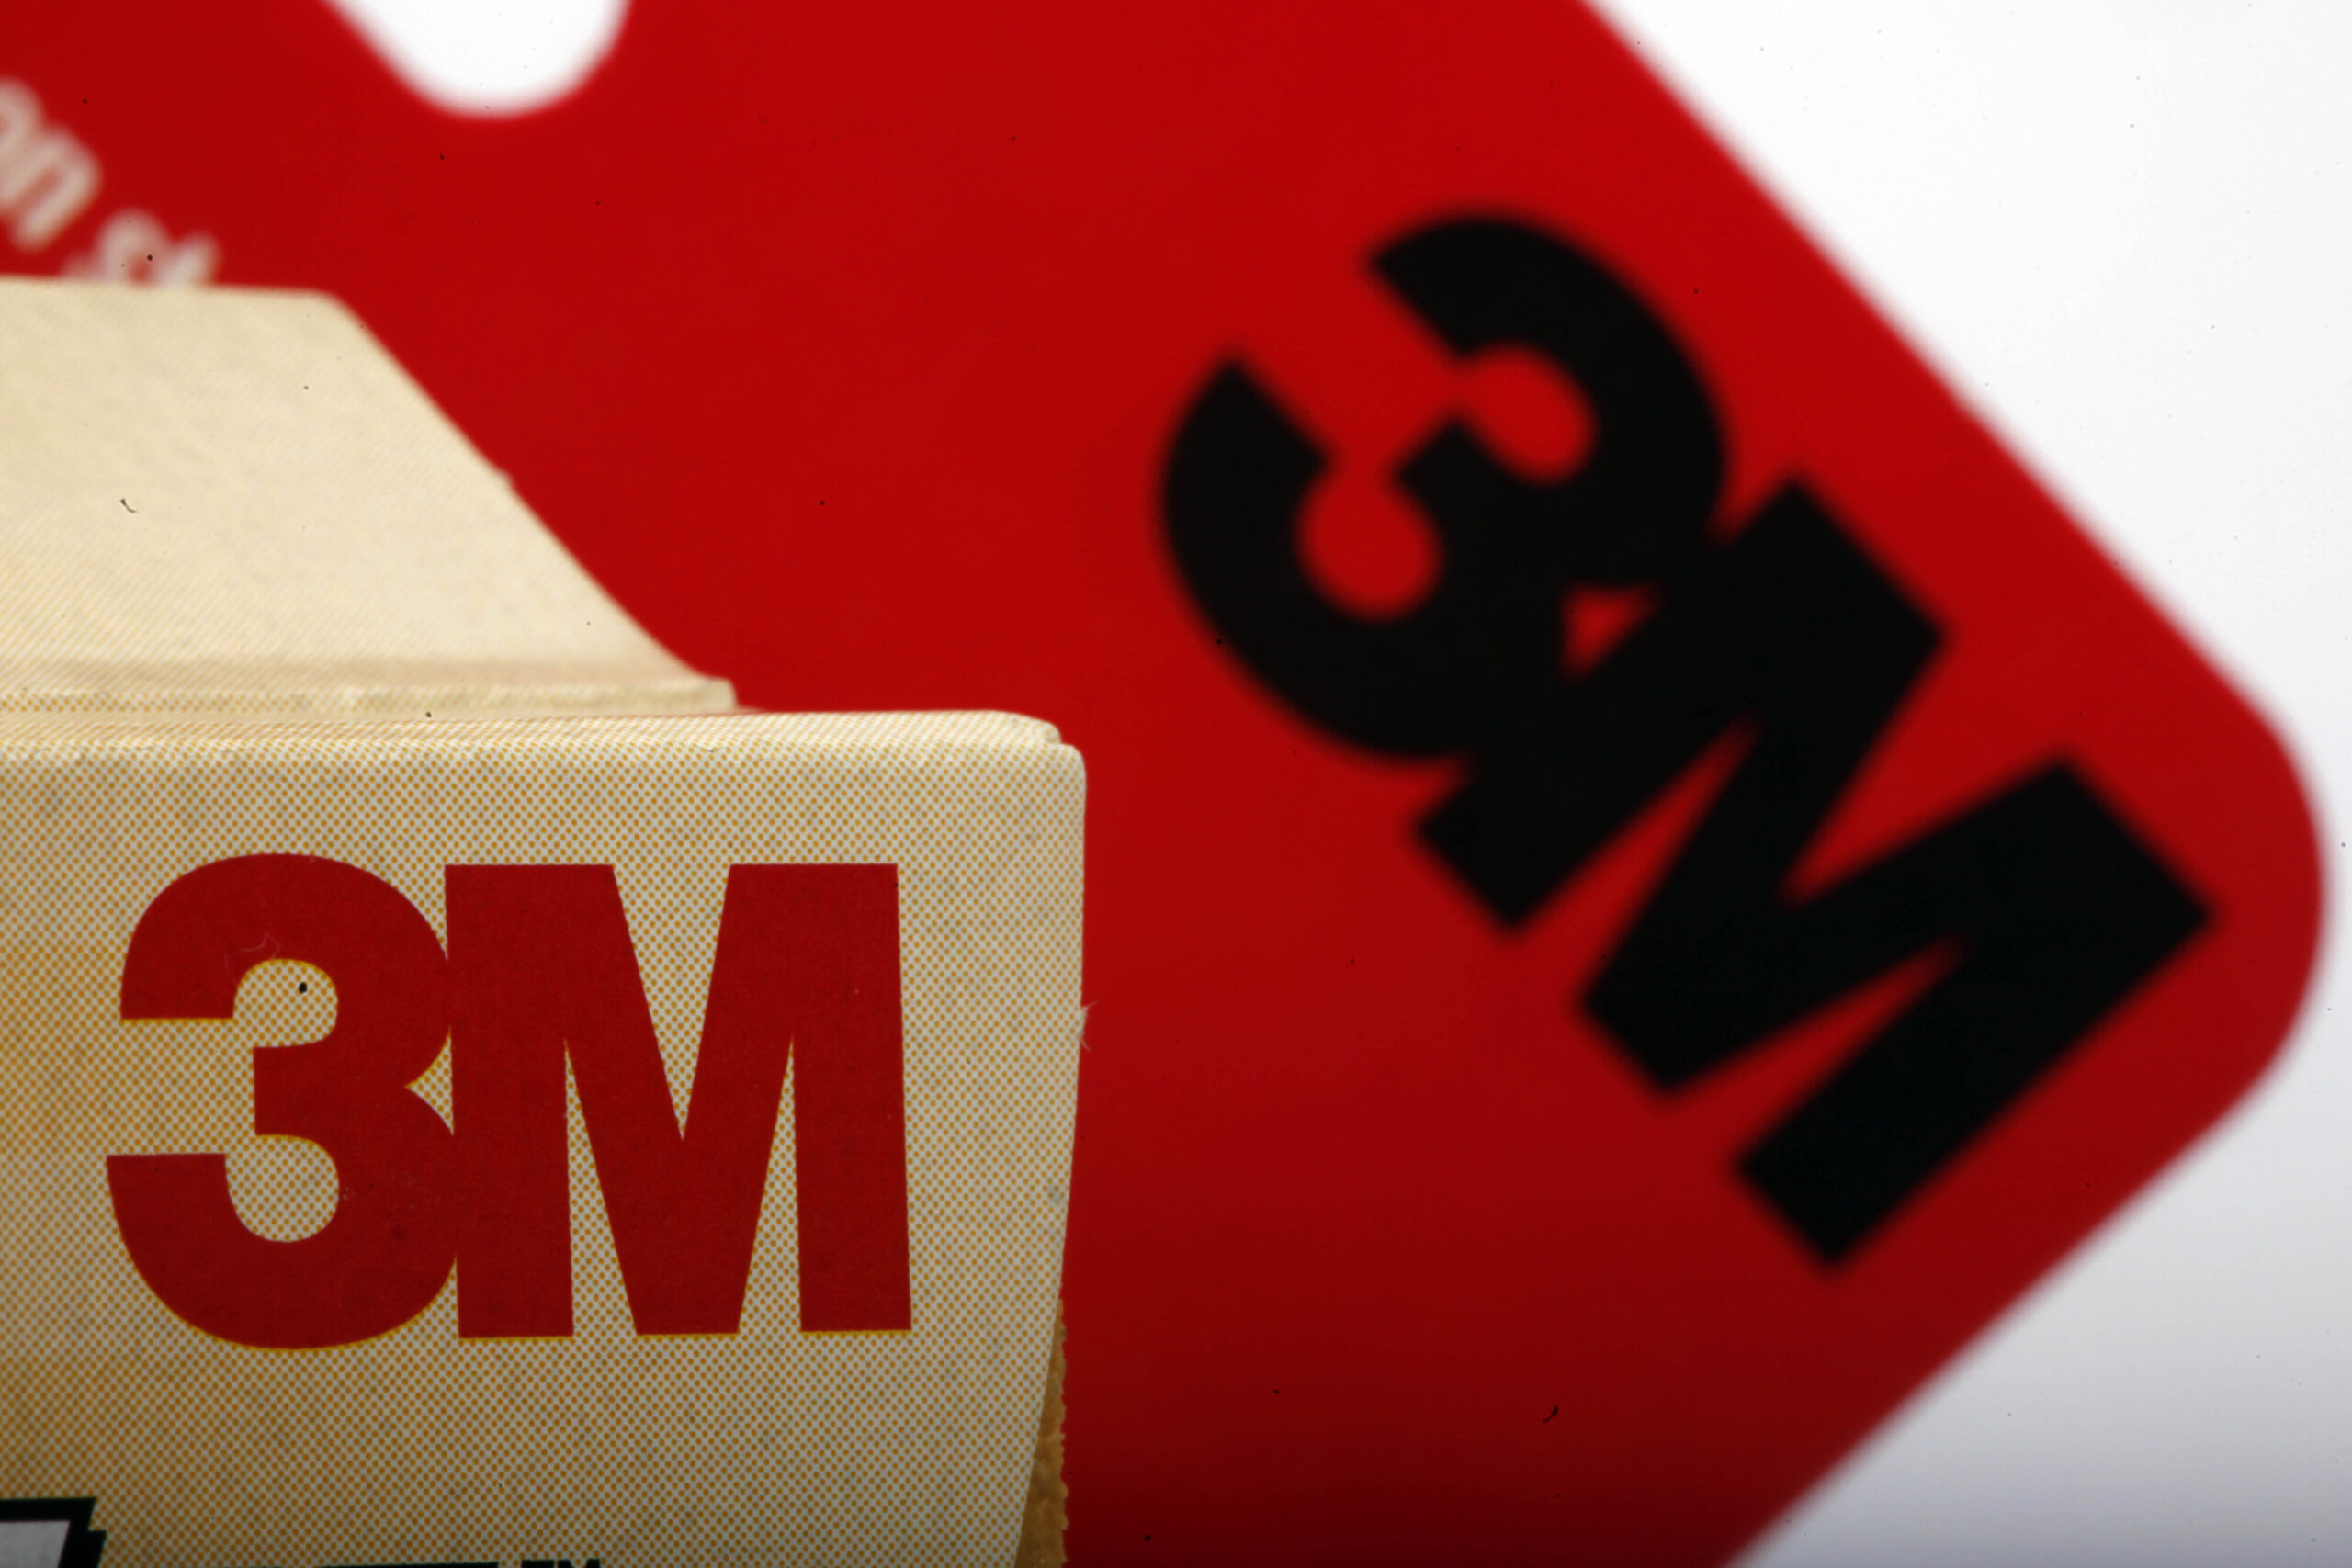 3M cited for safety violations following worker's death in Wisconsin - WPR